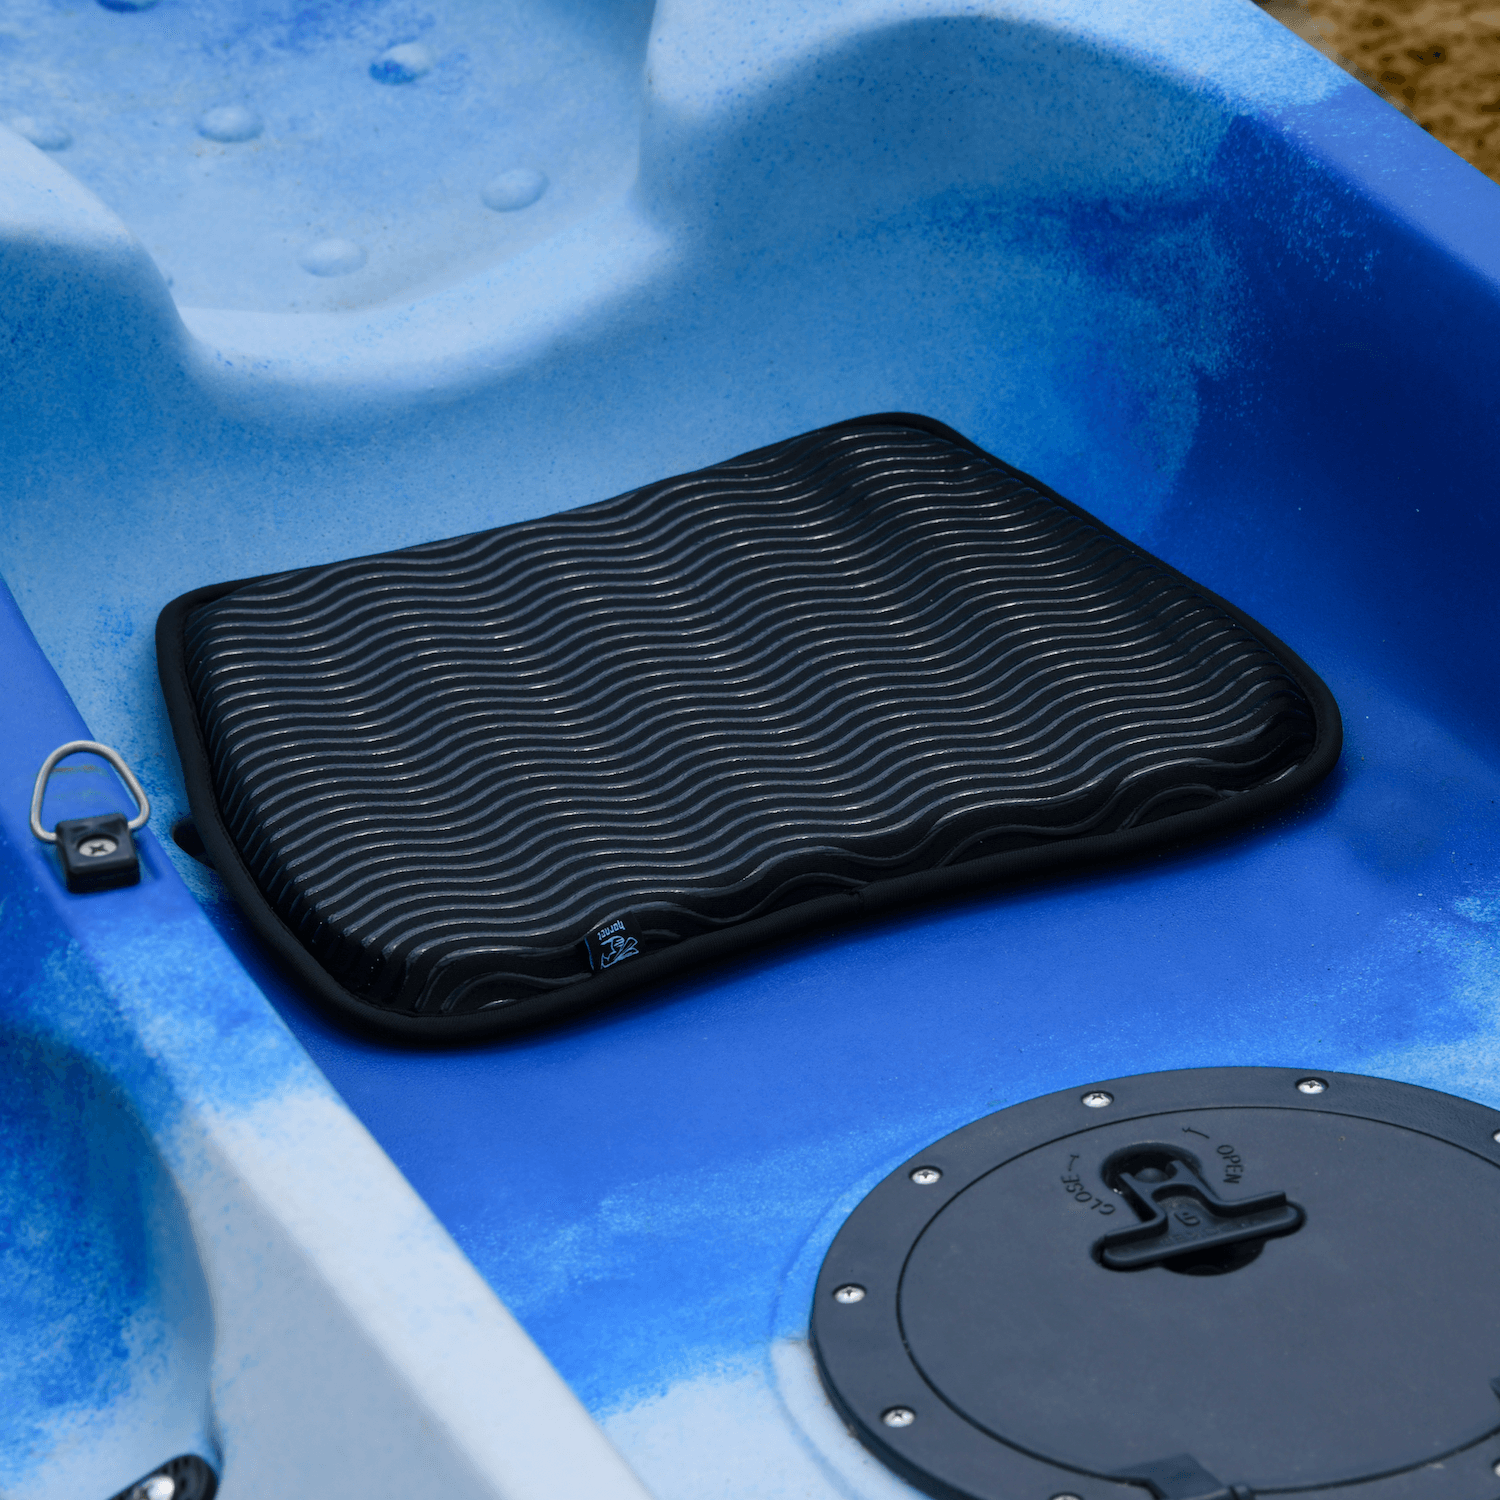 Anti Slip Kayak Gel Seat Cushion Thick Waterproof Egg Seat Cushion Kayak  Seat Pad With Non-Slip Cover for Sit In Kayak Chair, Boat Canoe Rowing